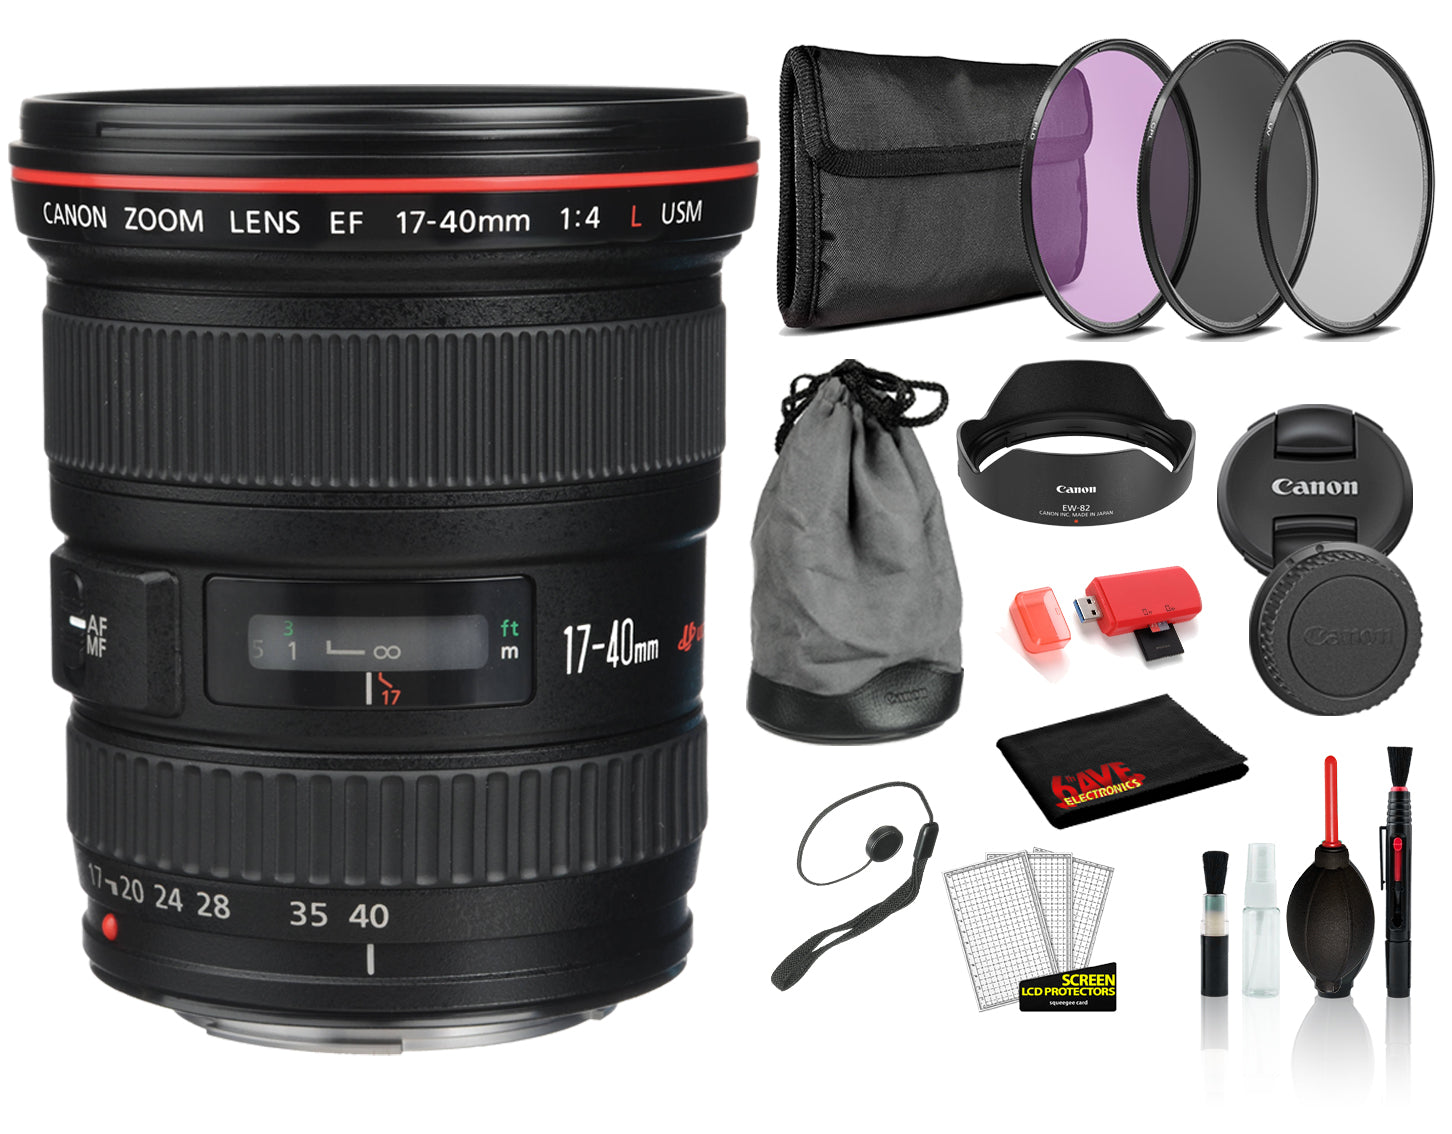 Canon EF 17-40mm f/4L USM Lens (8806A002) Lens with Bundle includes 3pc Filter Kit) + Deluxe Lens Cleaning Kit + More